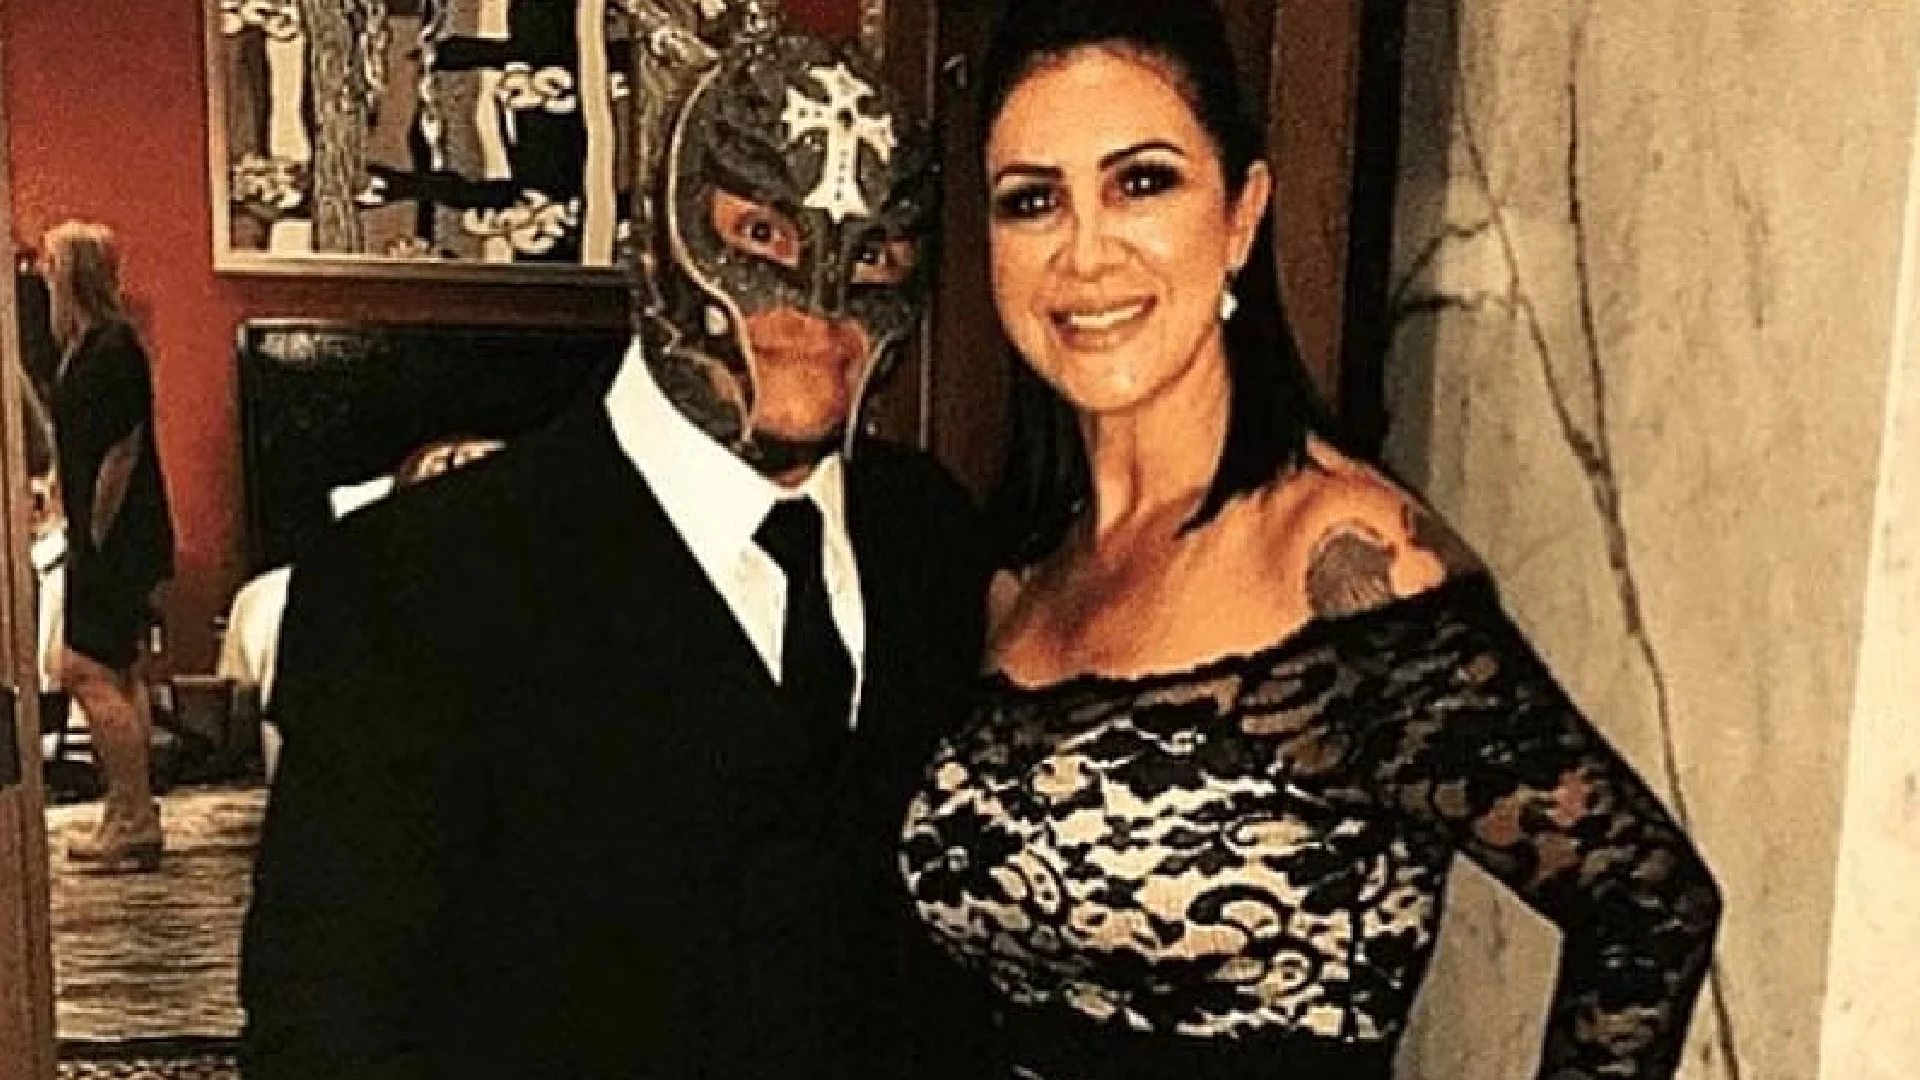 How long has Rey Mysterio been married to his wife Angie?